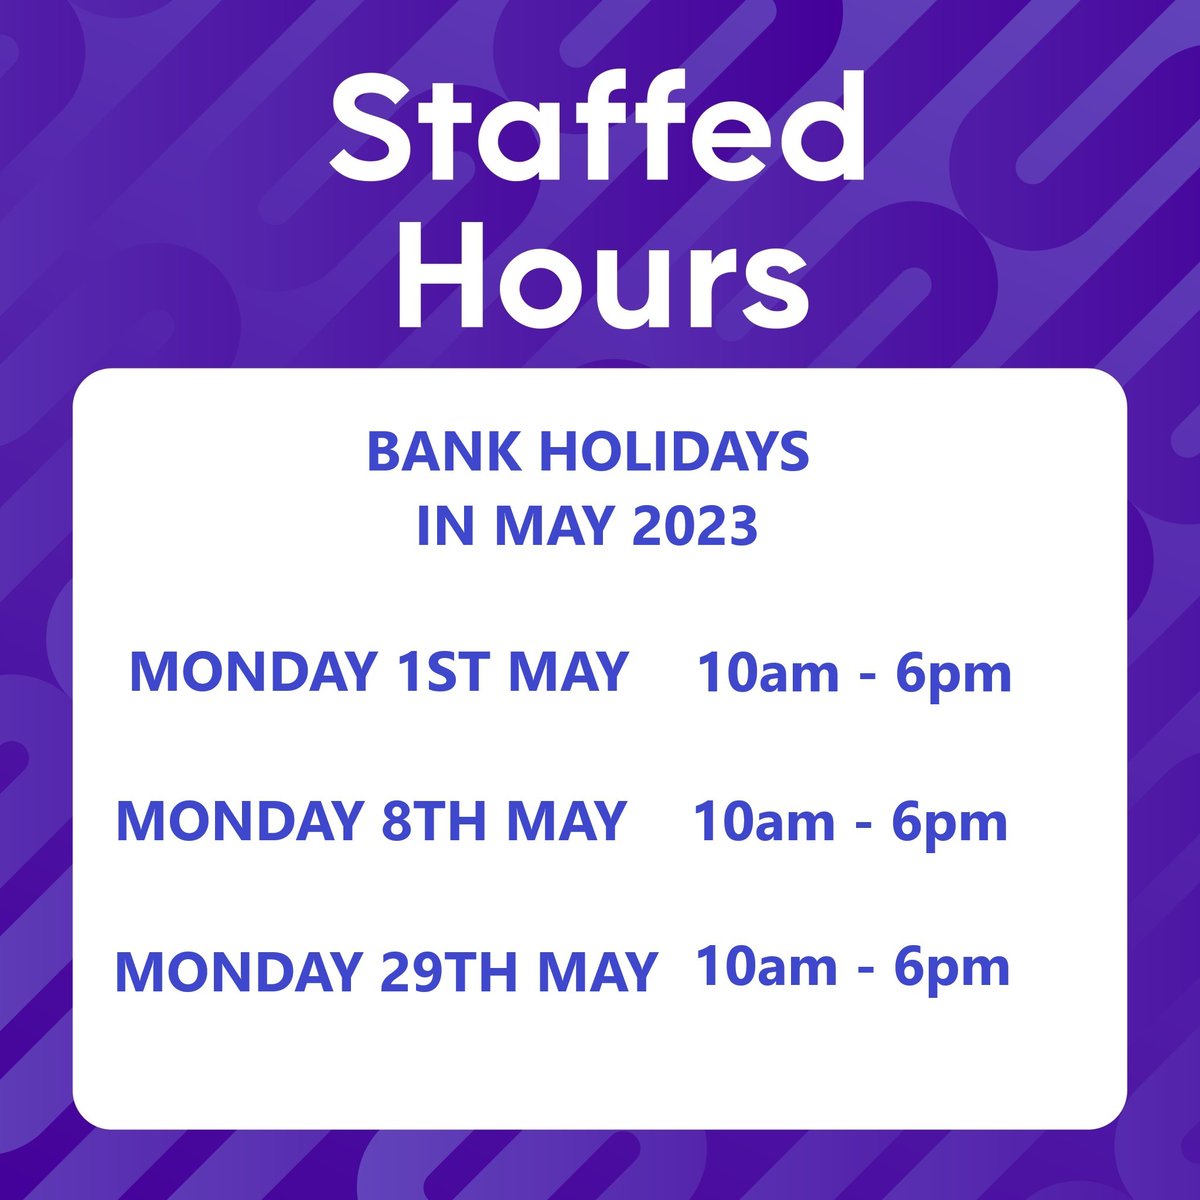 We have a busy month of Bank Holiday weekends ahead of us in May. Enjoy the festivities, the extra workouts or a weekend away. We will be operating weekend timings for staff on Monday 1st, 8th and 29th but remain open 24/7 for all members.

#247gym #staffedhours #bankholiday...